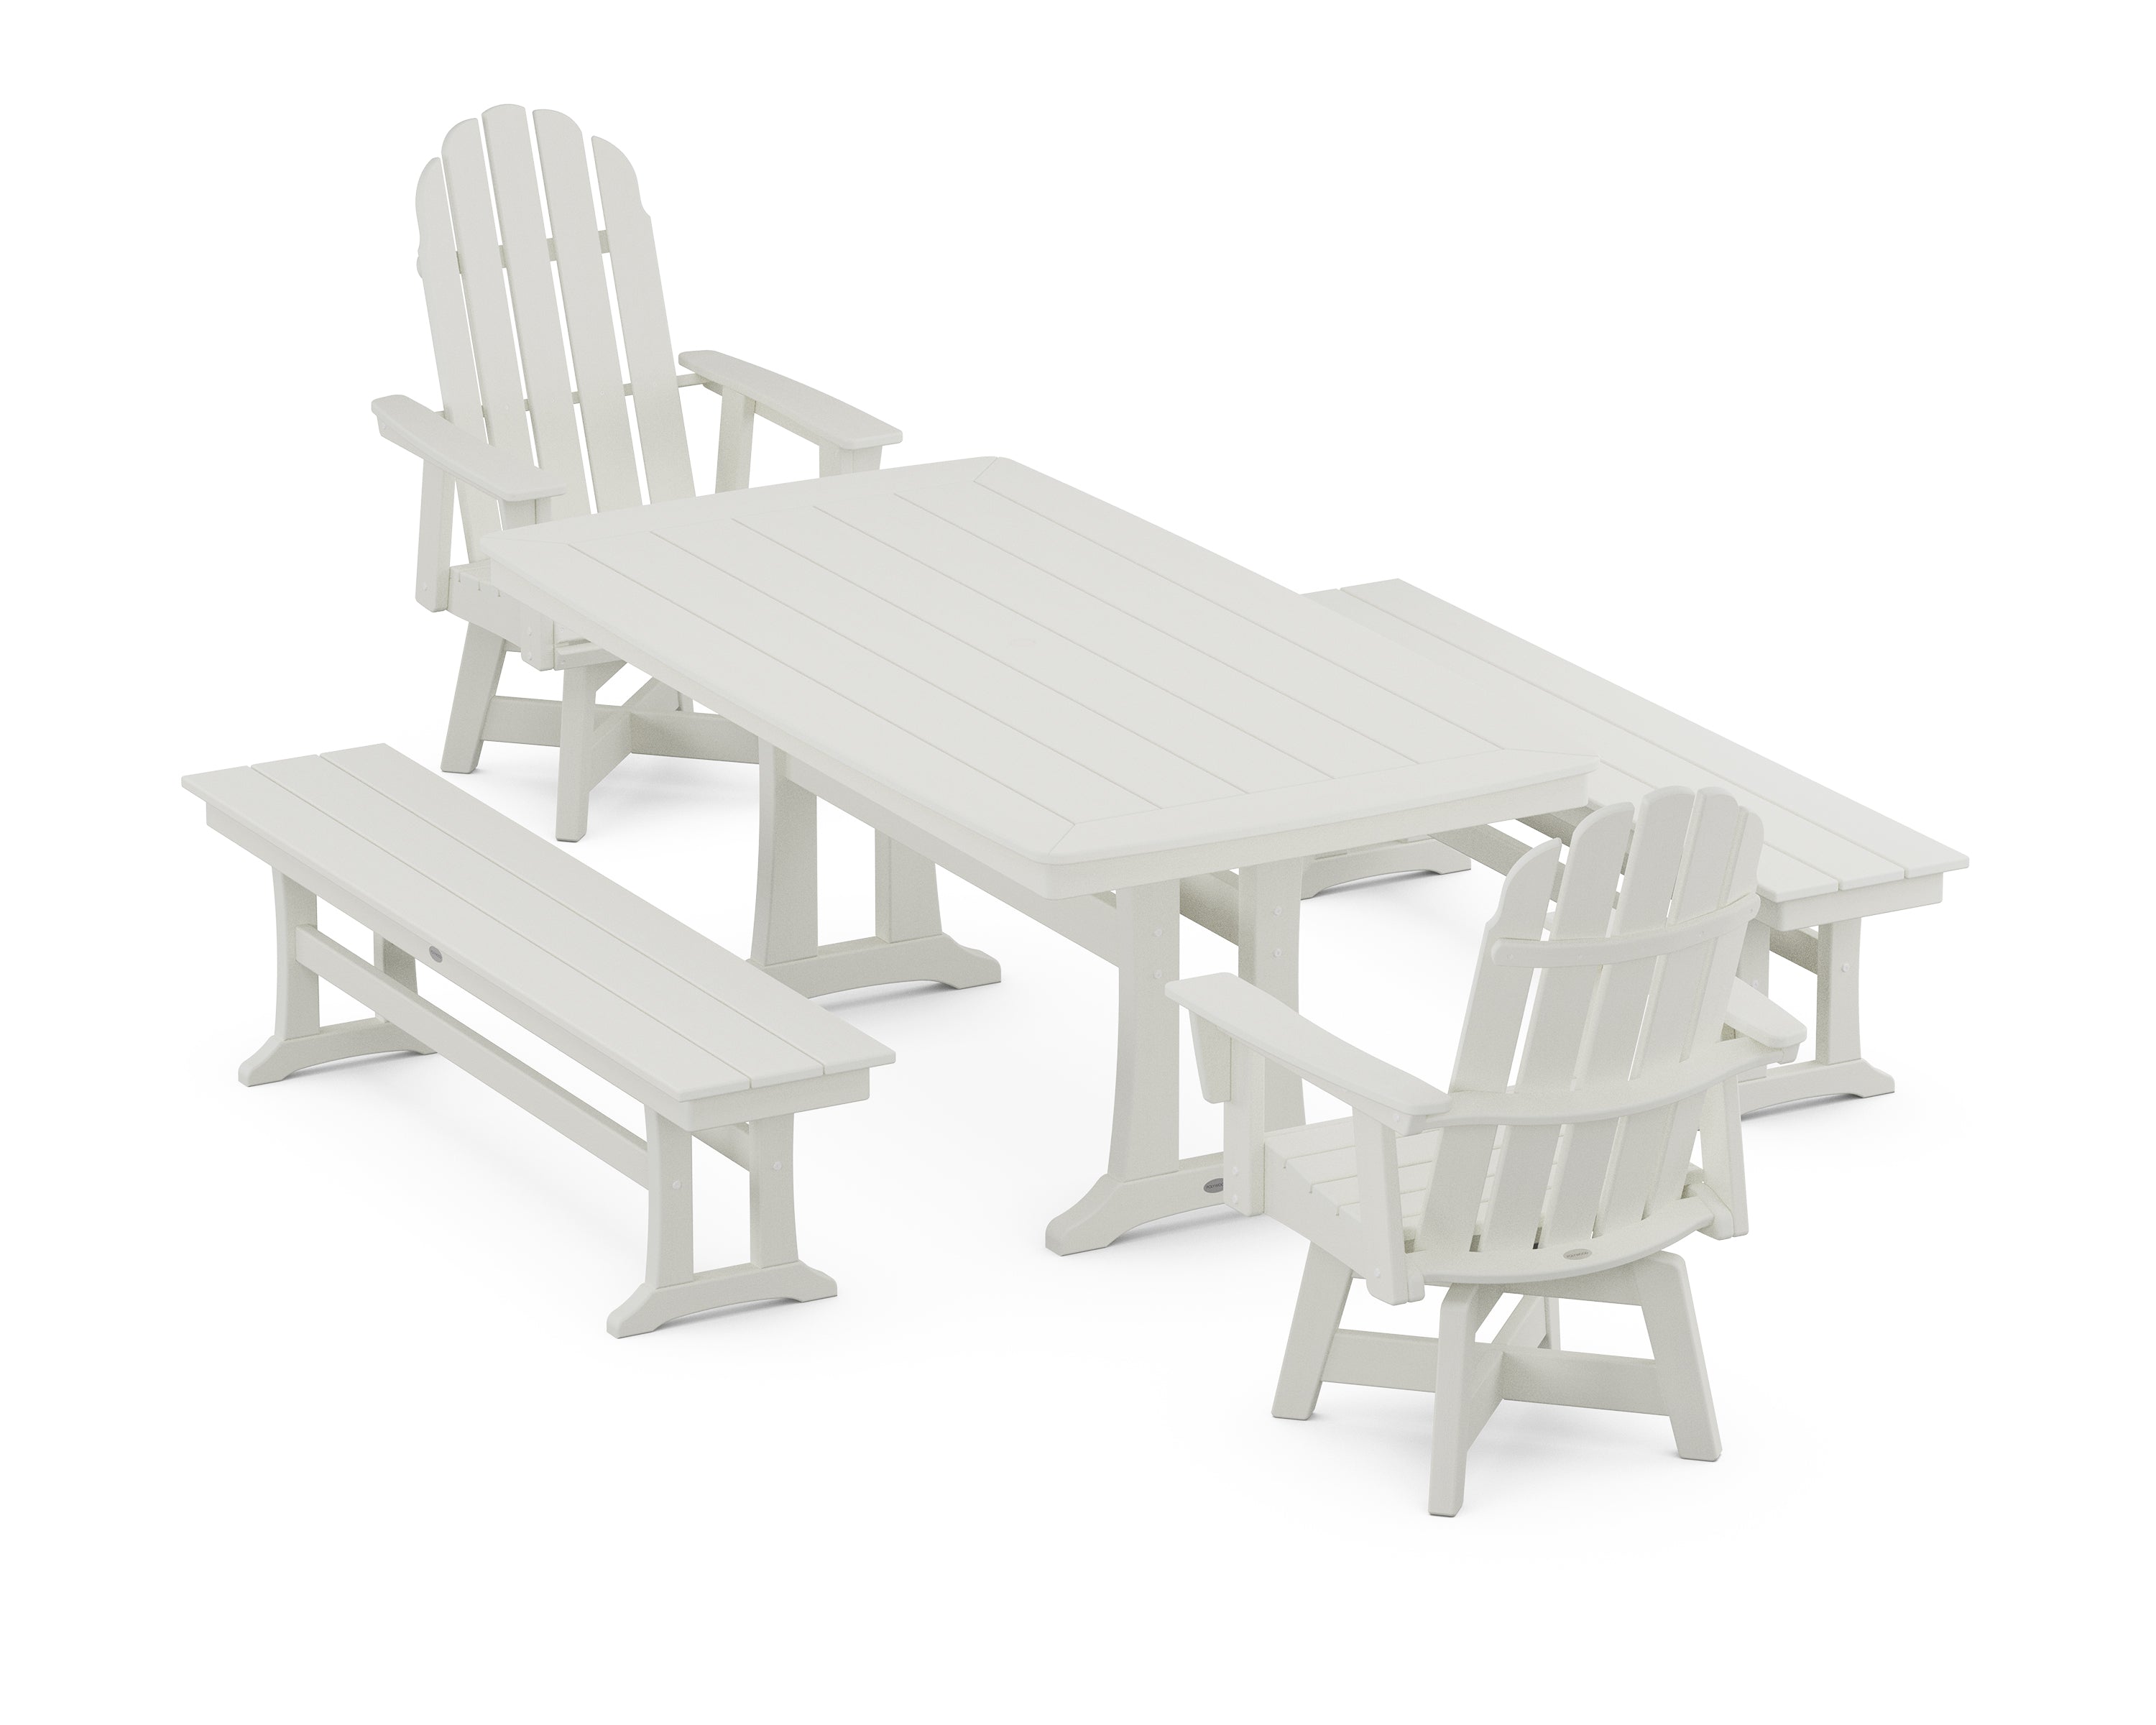 POLYWOOD® Vineyard Adirondack Swivel Chair 5-Piece Dining Set with Trestle Legs and Benches in Vintage White